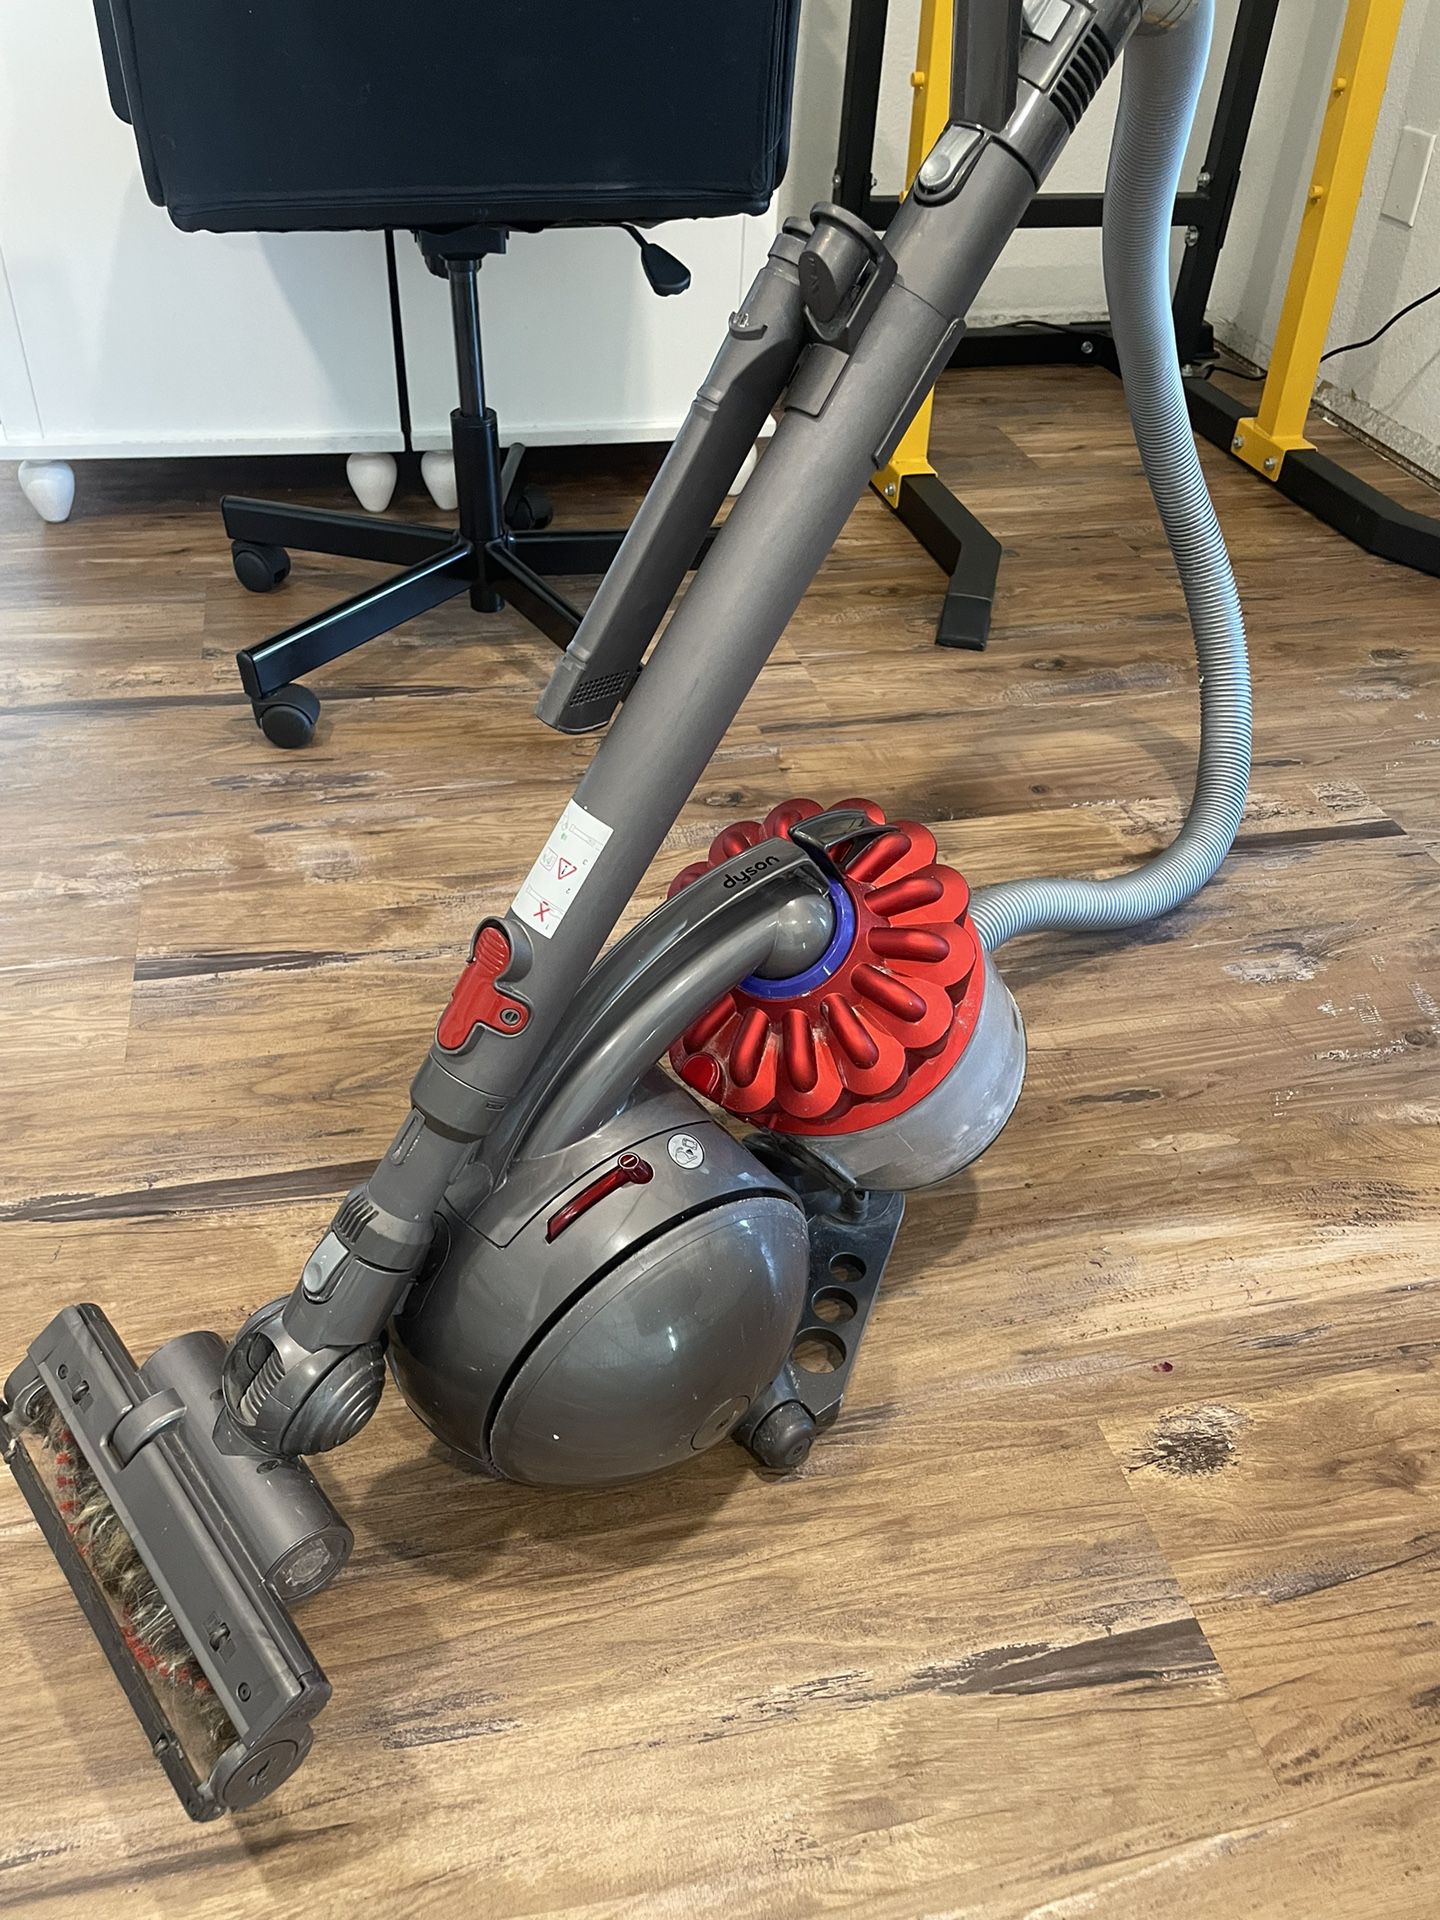 Vacuum Dyson Wired